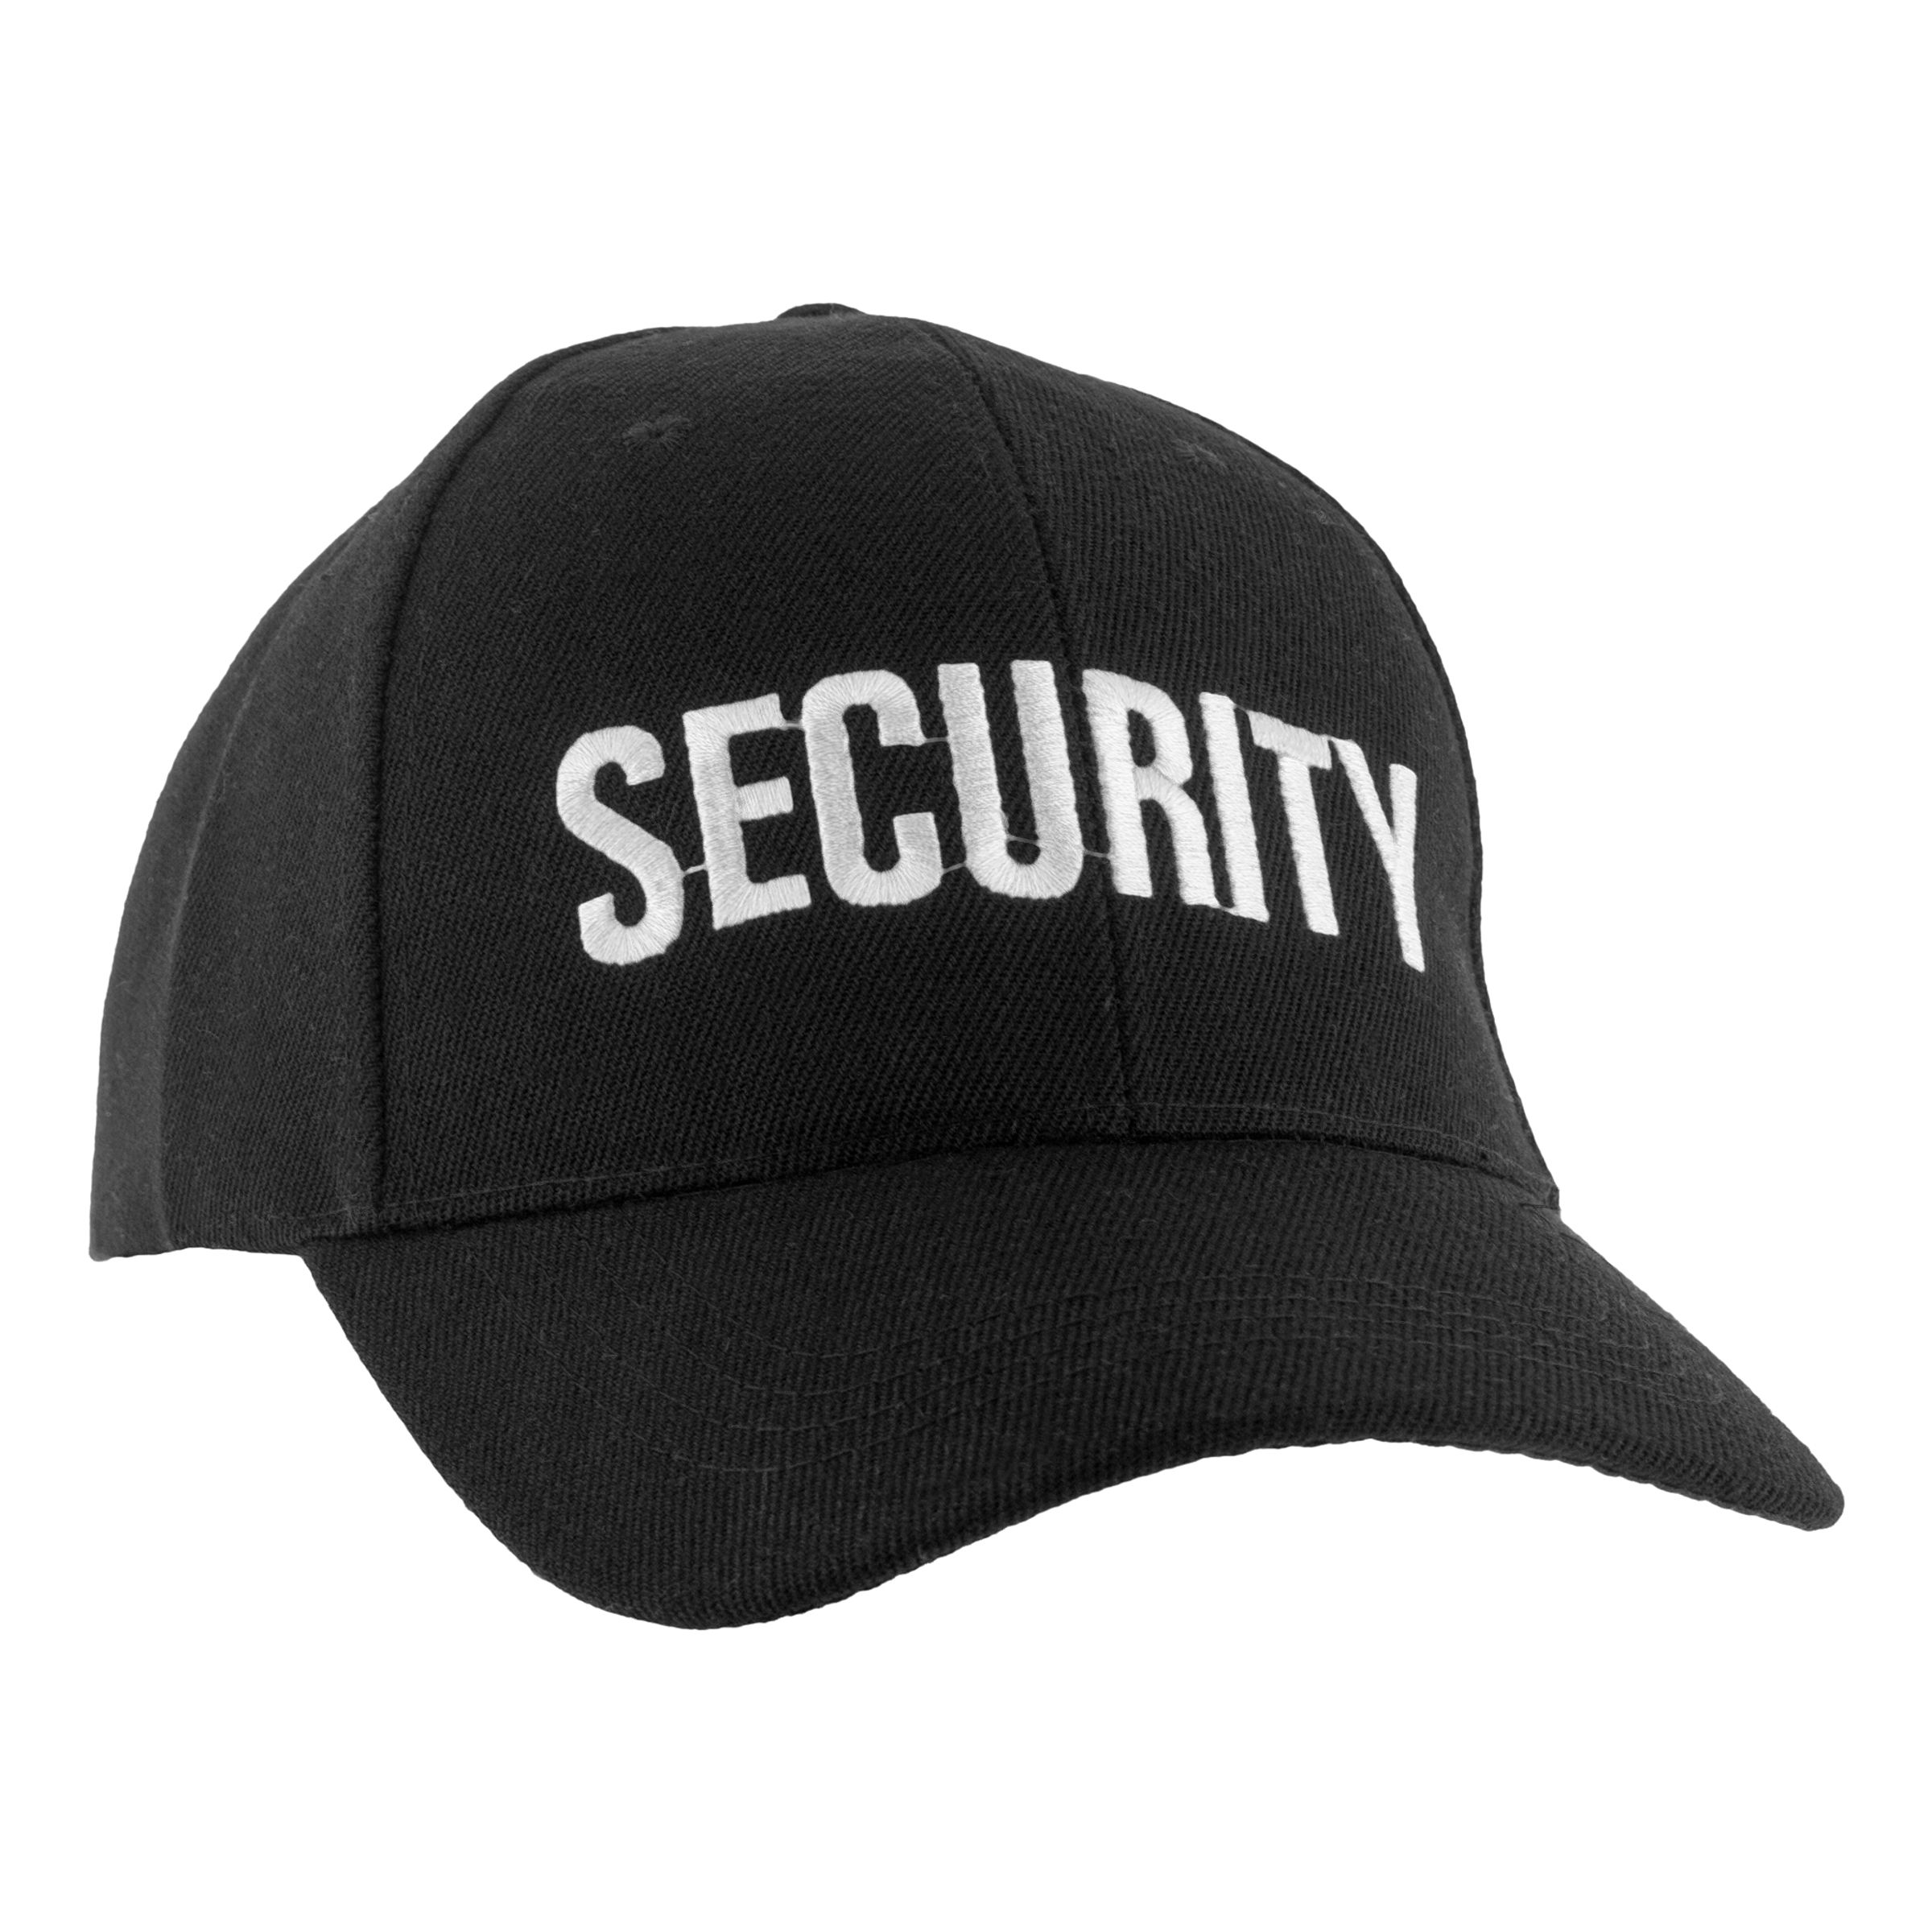 Keps Security - One size